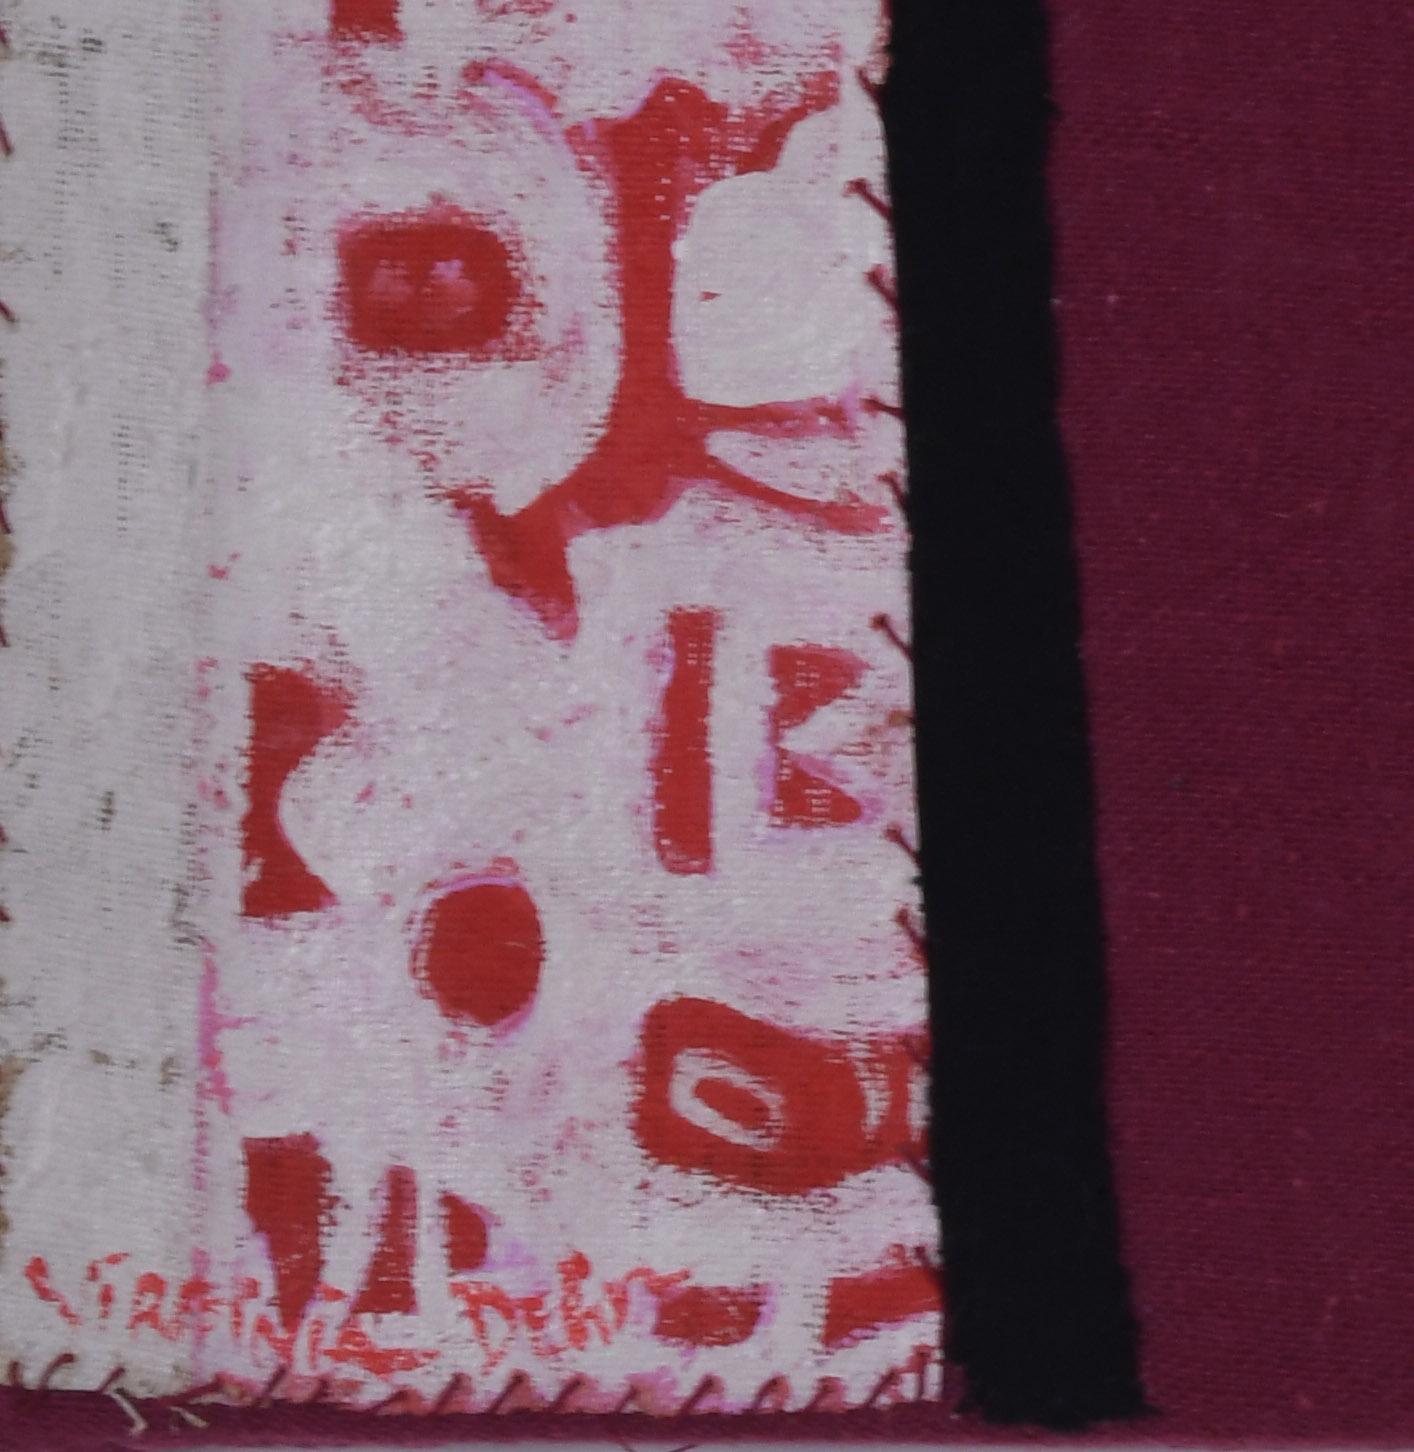 Chaco
Canvas, fabric, pigment and collage elements, 1985-1995
Signed lower left corner in red paint
Title and signed in pencil on the verso on the top of the stretcher
Condition: Excellent
Canvas size: 18 x 18 inches
Provenance: Estate of the